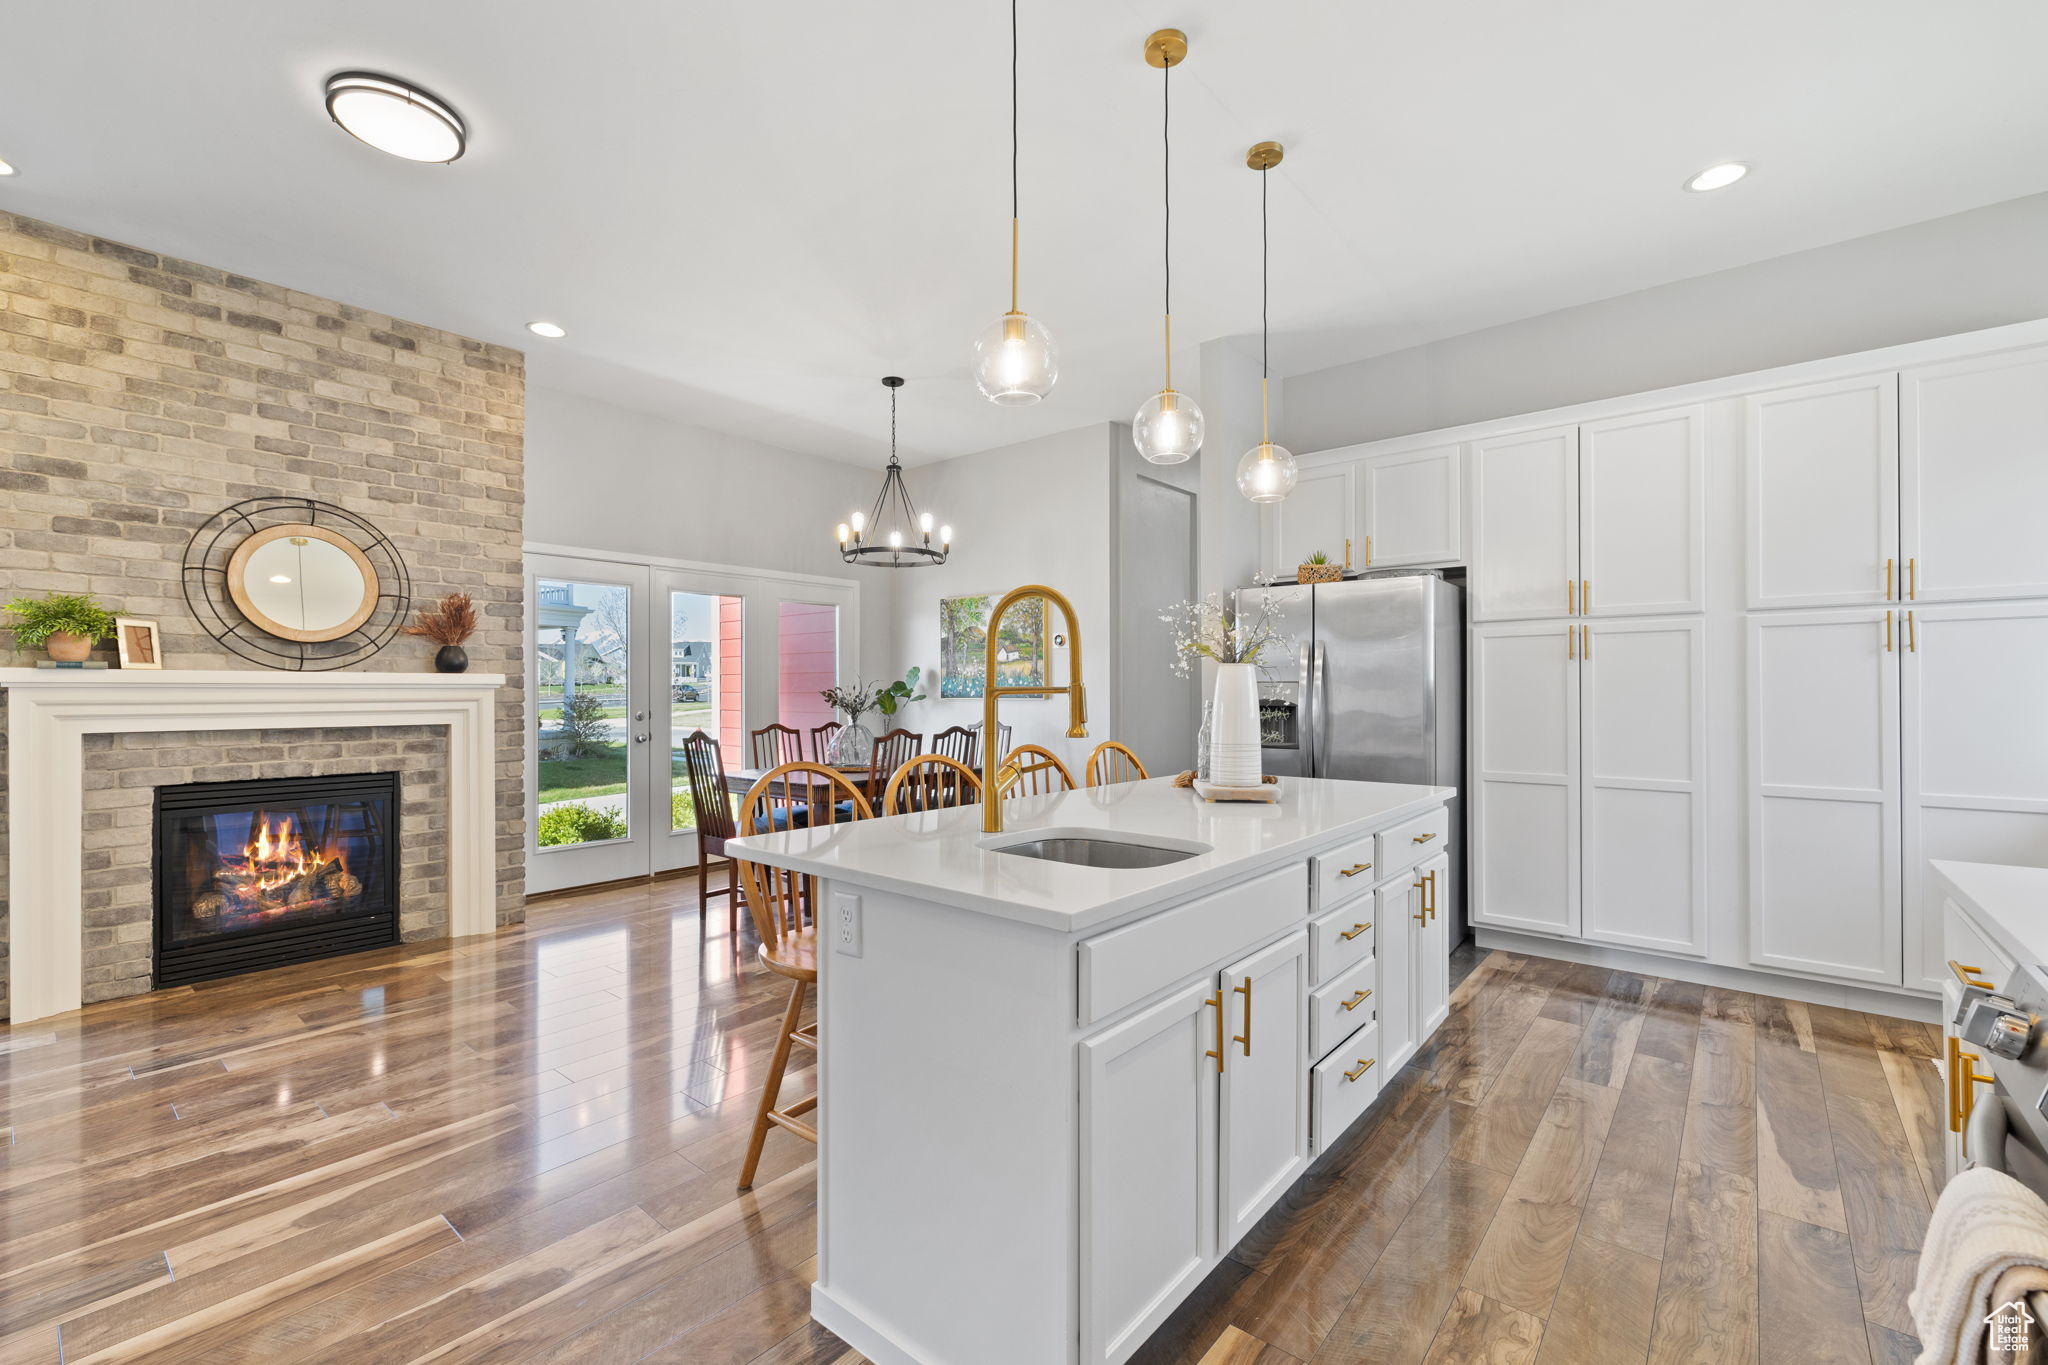 Kitchen featuring white cabinets, hardwood / wood-style floors, stainless steel refrigerator with ice dispenser, and pendant lighting